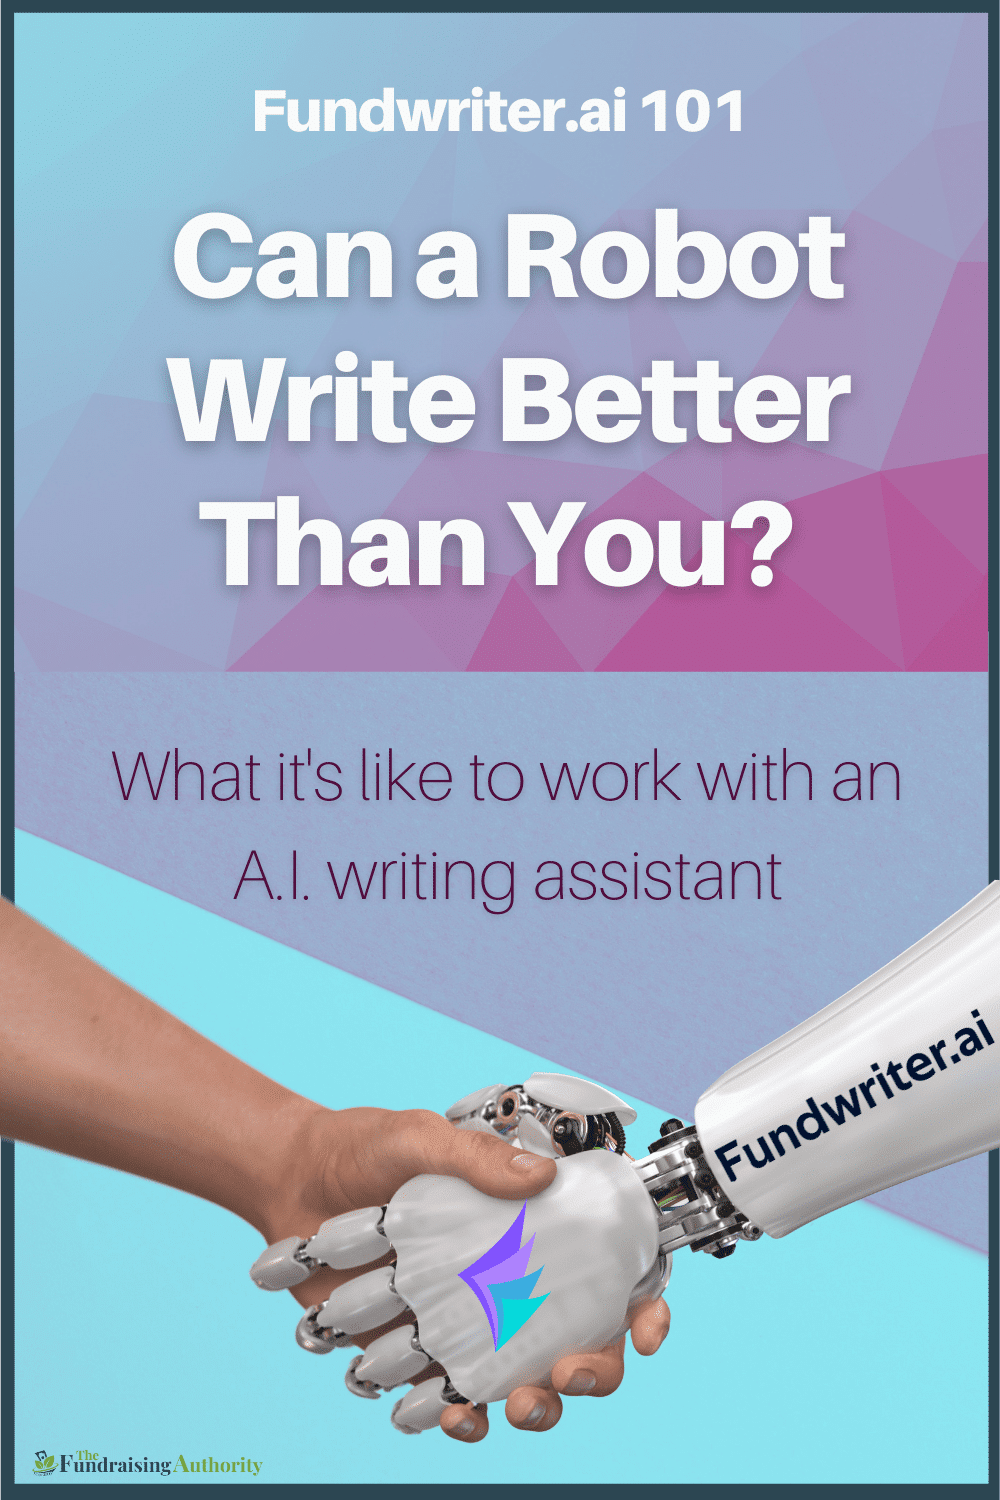 Fundwriter.ai 101 - Can a Robot Write Better Than You